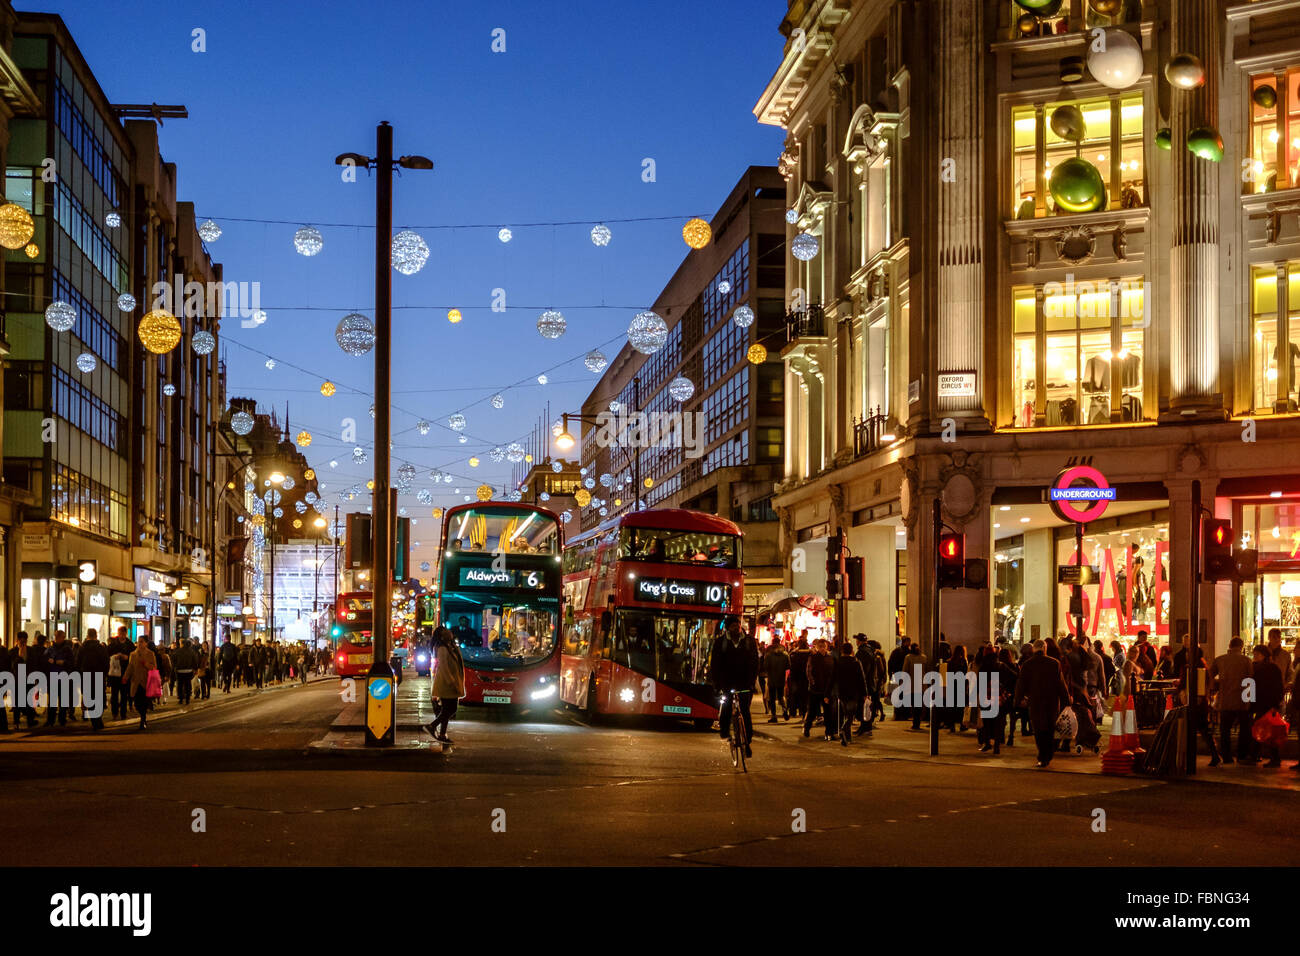 Oxford Circus am Weihnachtsabend in London, England. Stockfoto